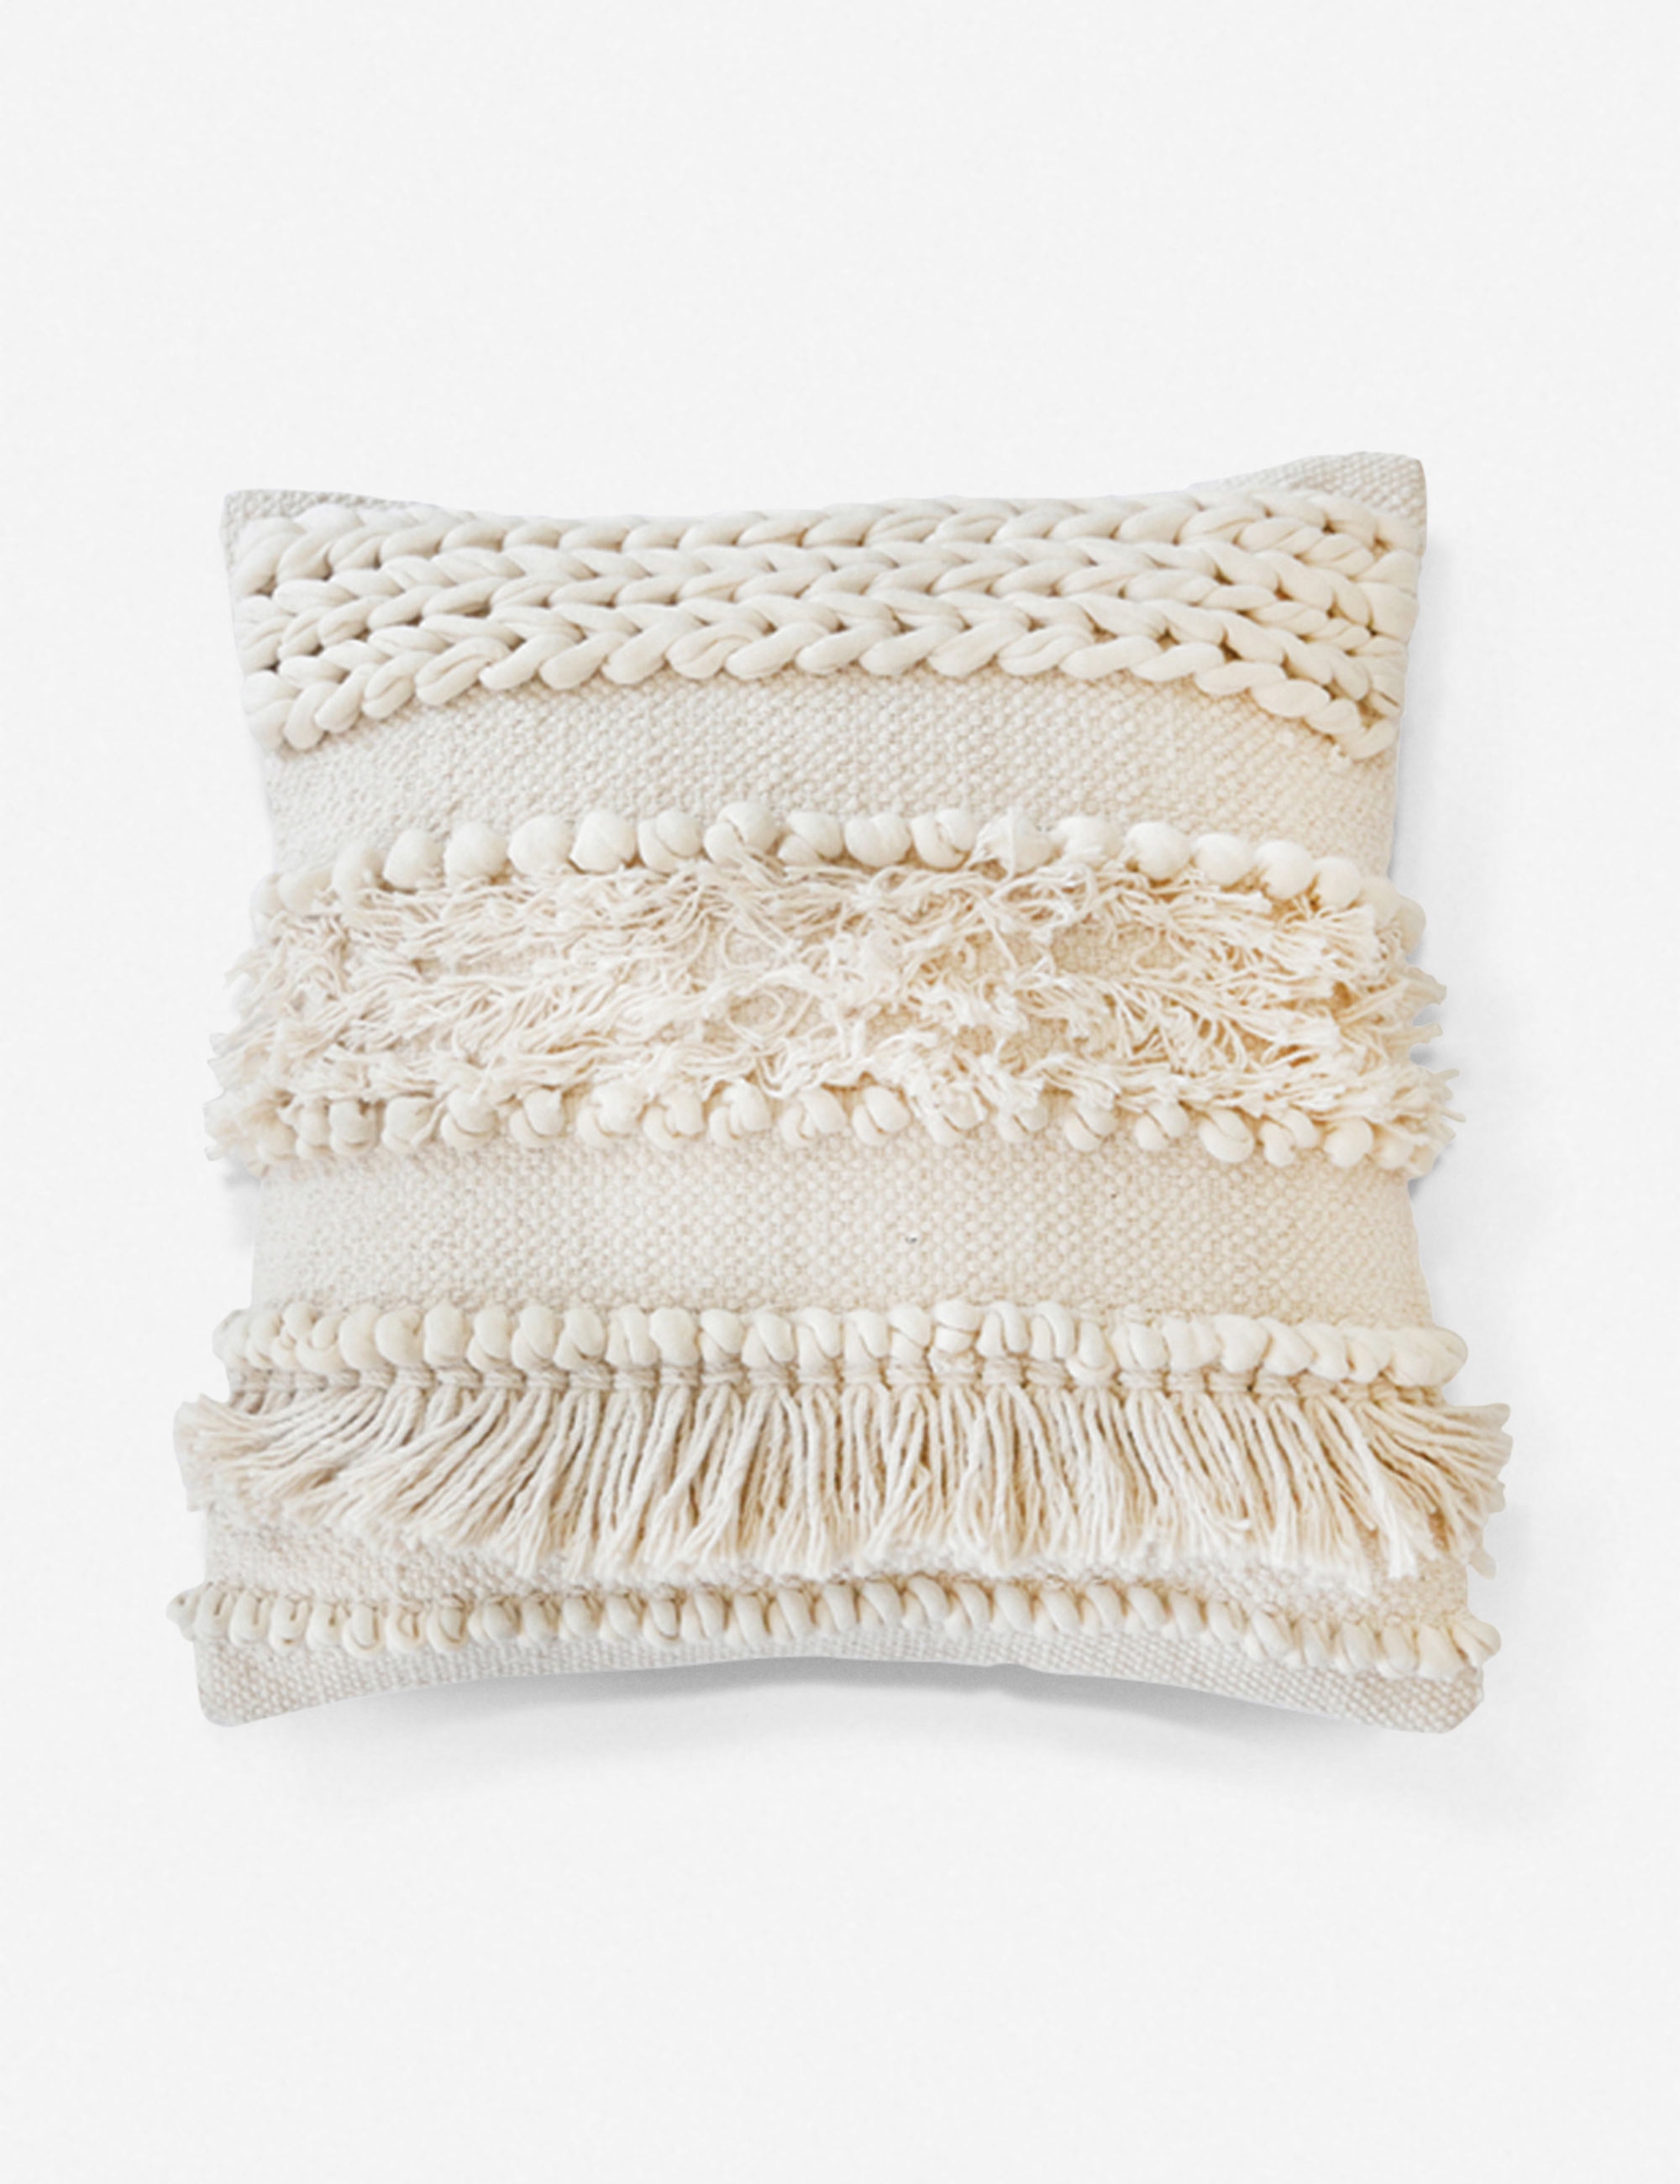 Iman Pillow by Pom Pom at Home - Image 0